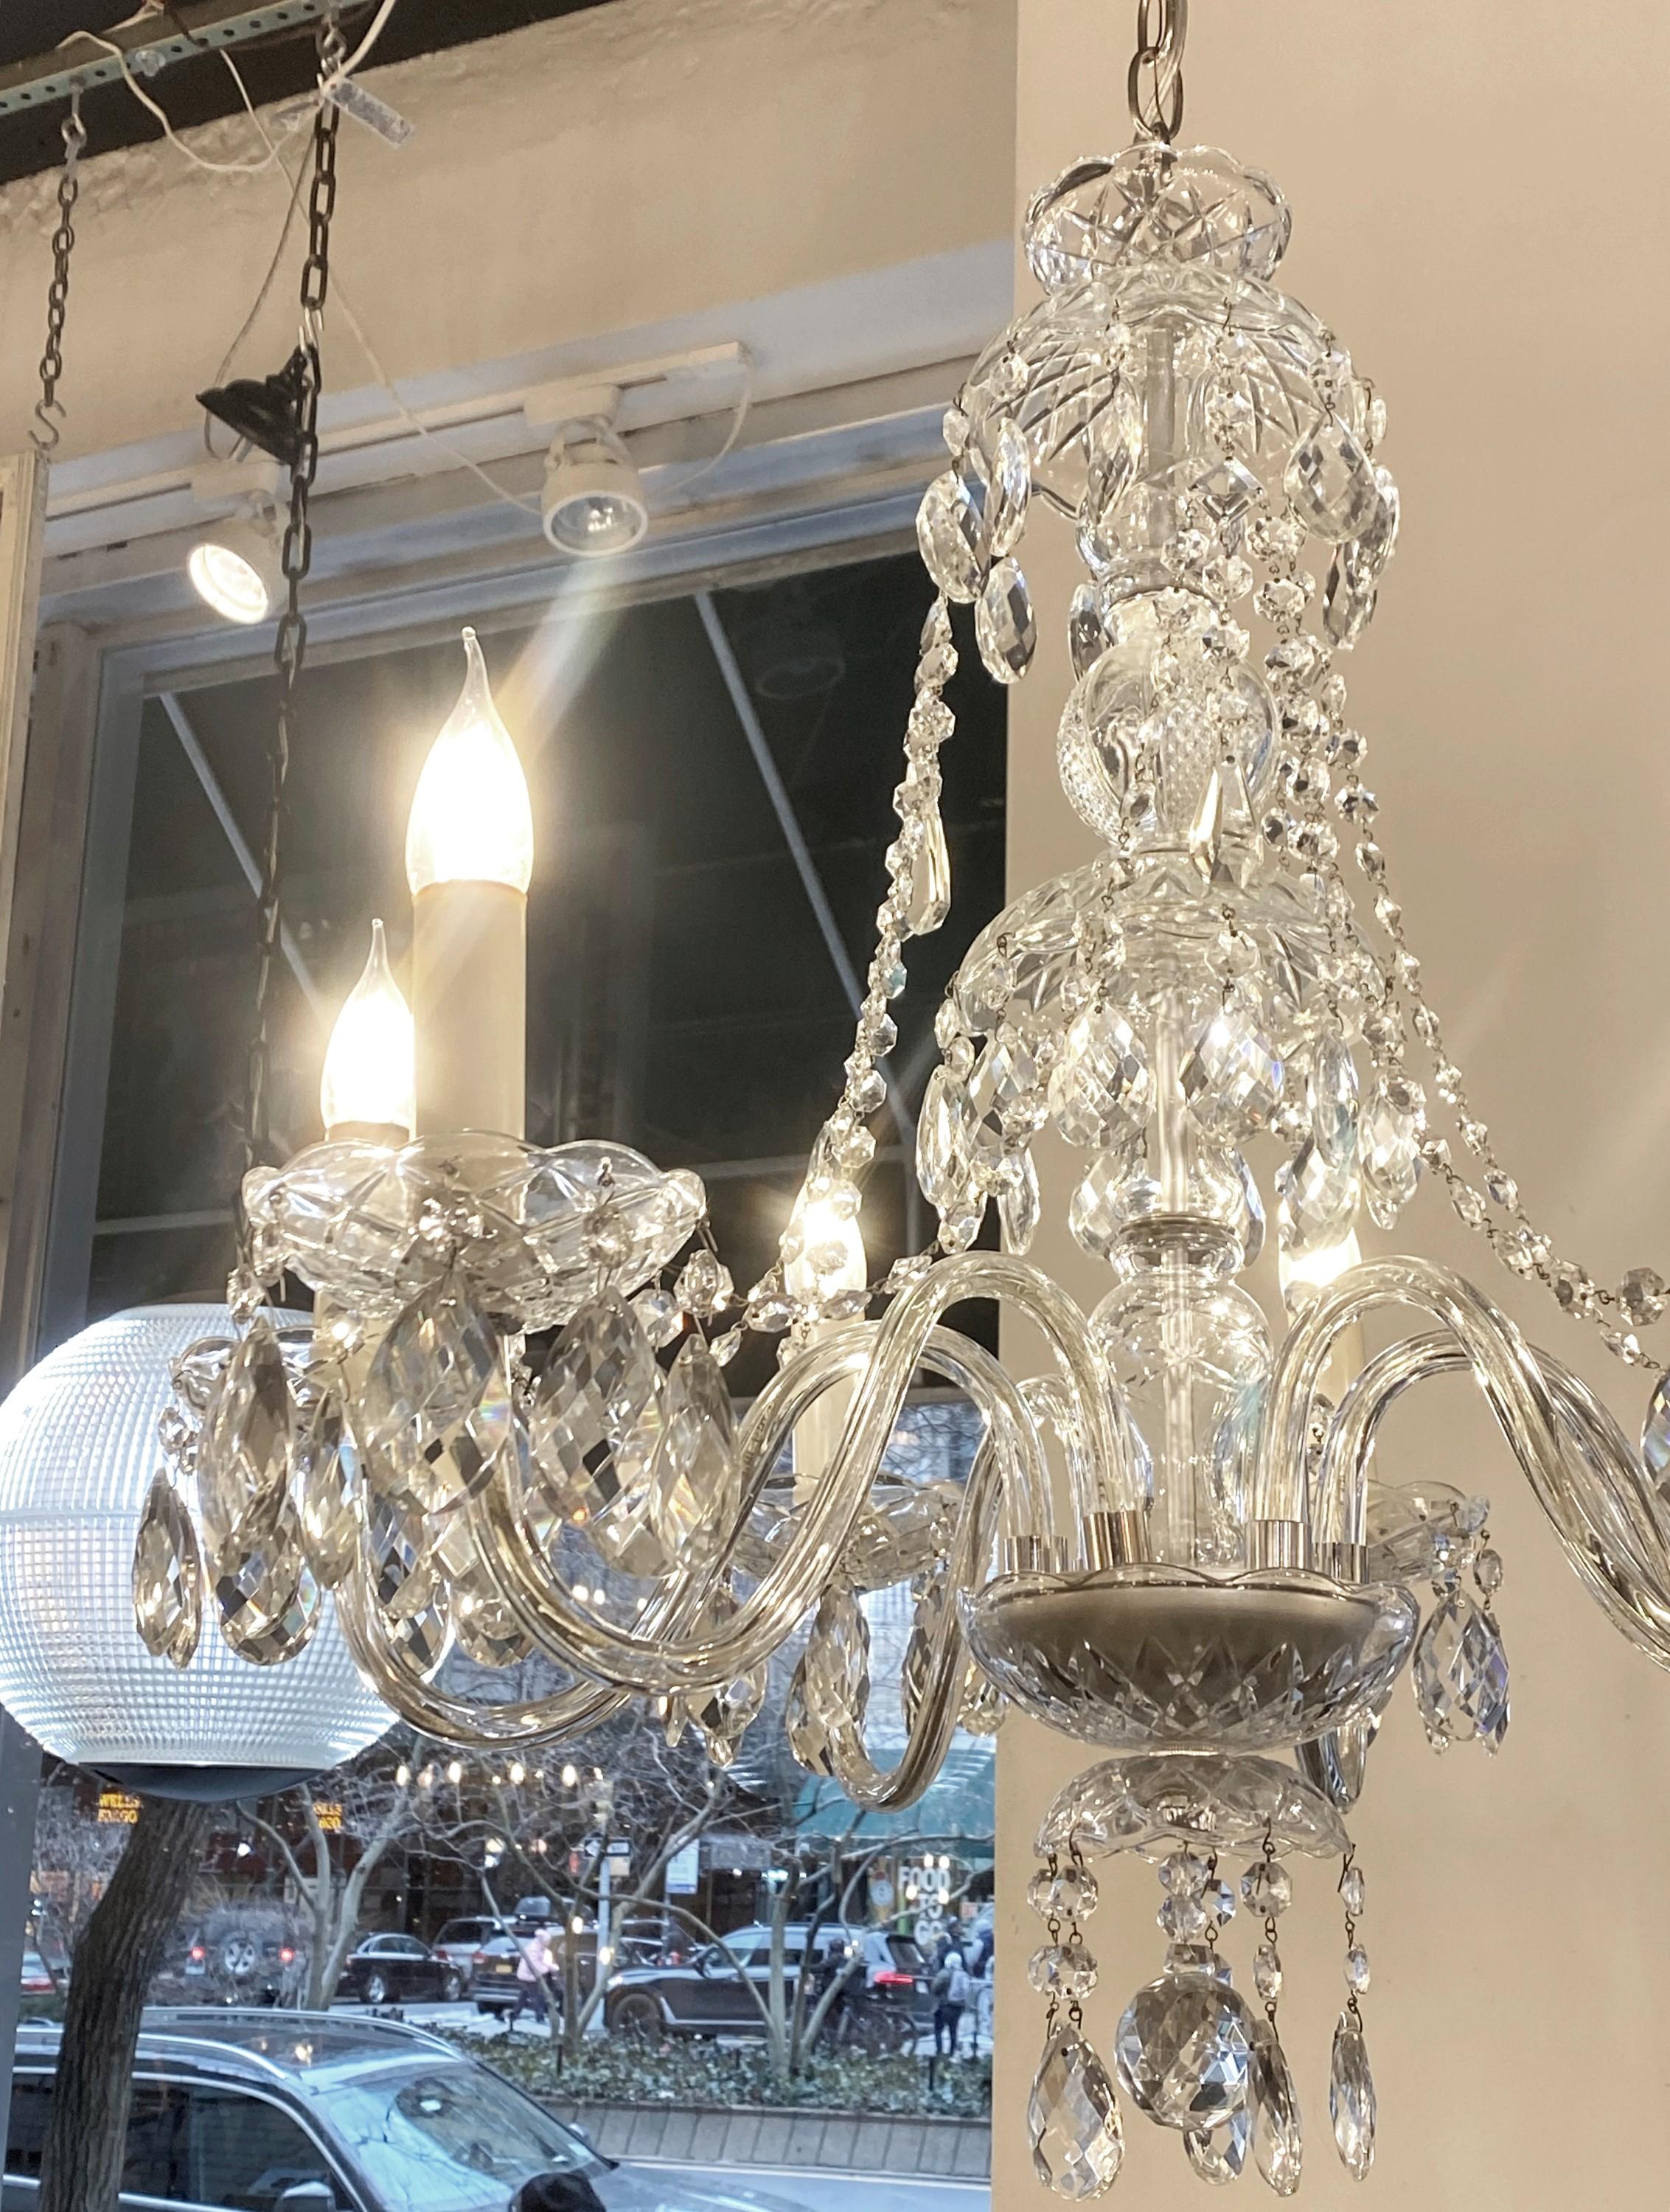 Polished 1940s Marie Teresa 6 Arm Crystal Chandelier Swags + Beads For Sale